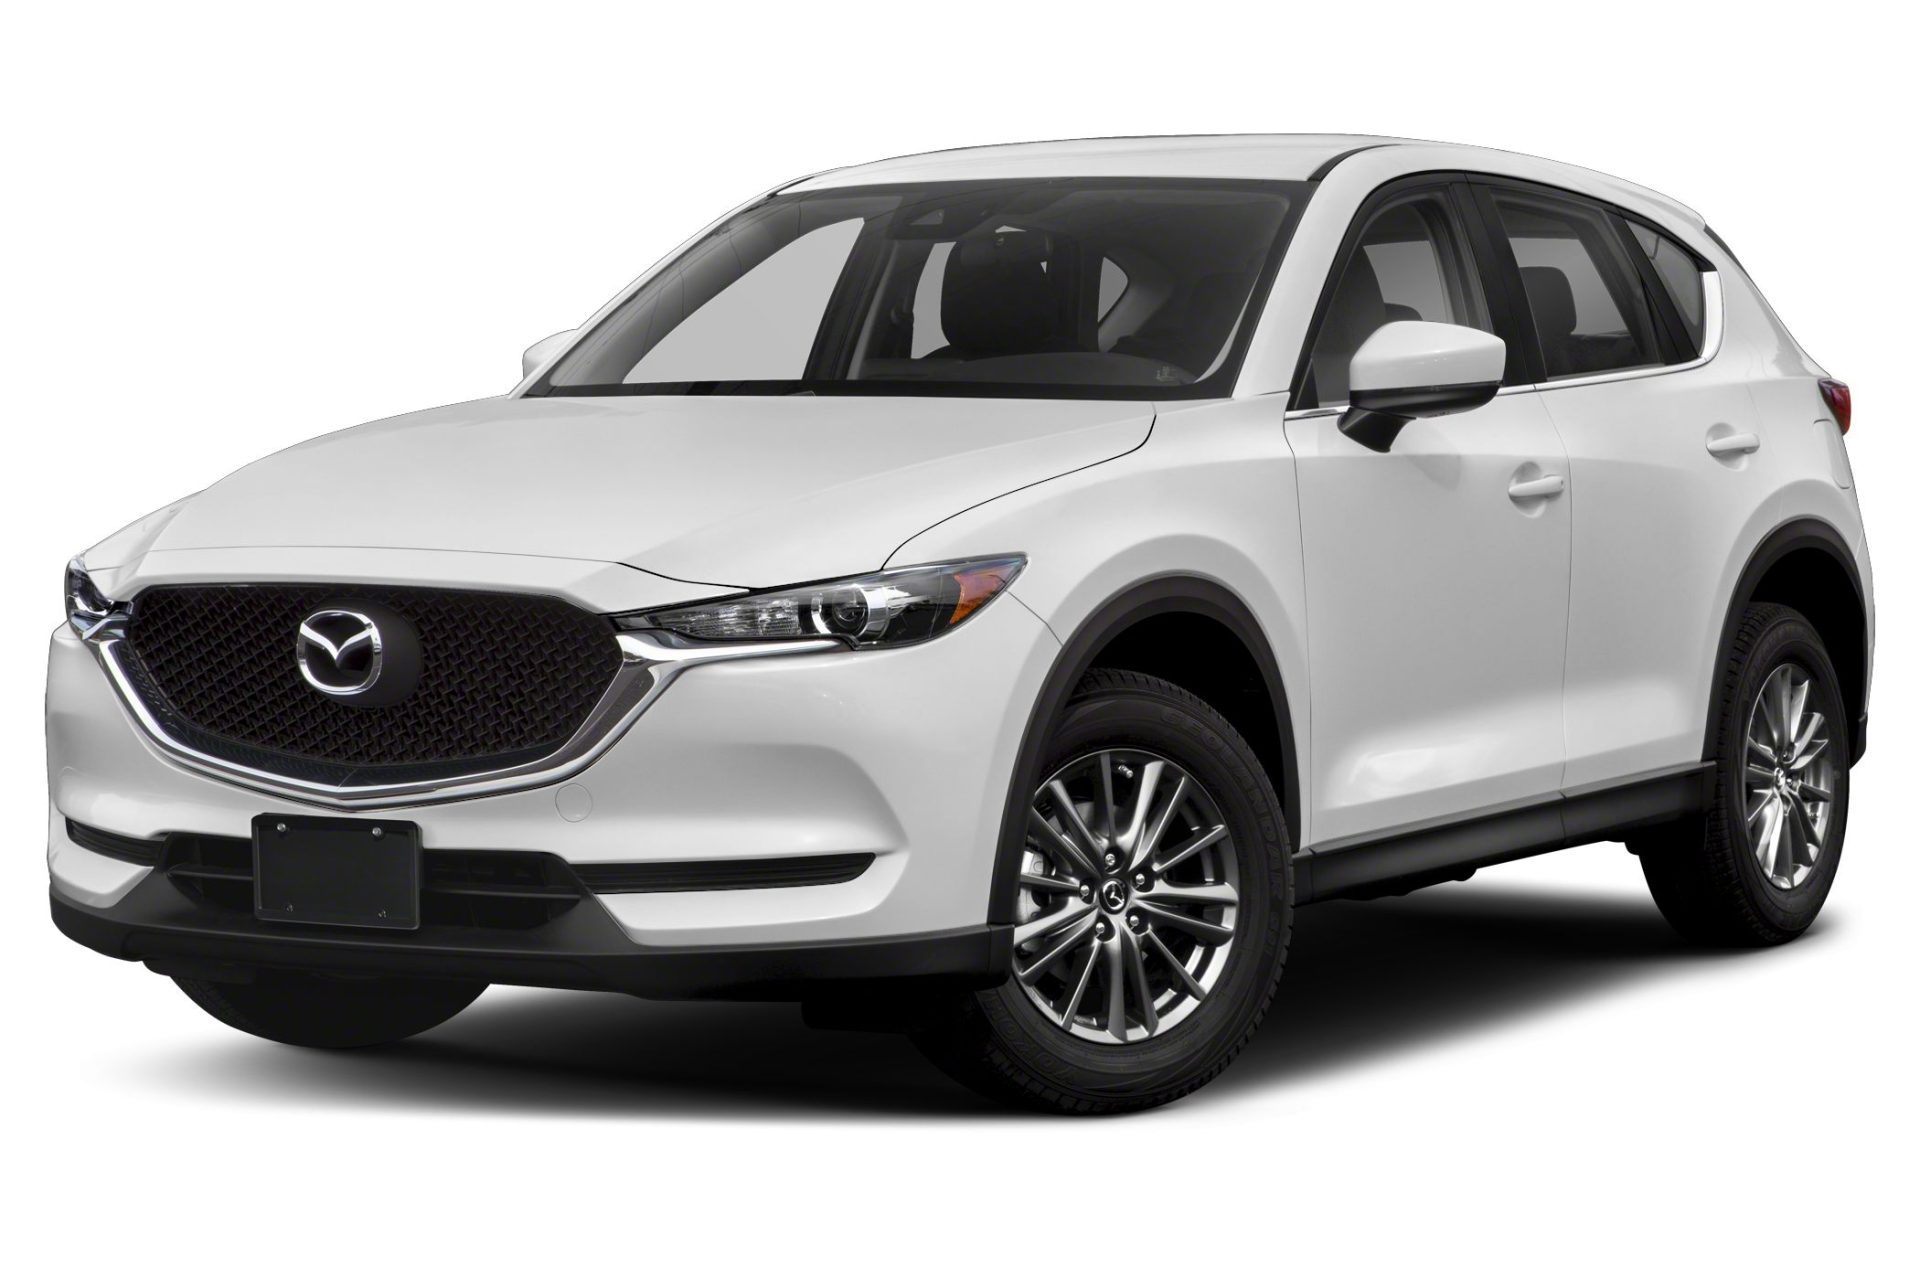 A closer look at a Pioneer in Automotive engineering: The Mazda CX-5 ...